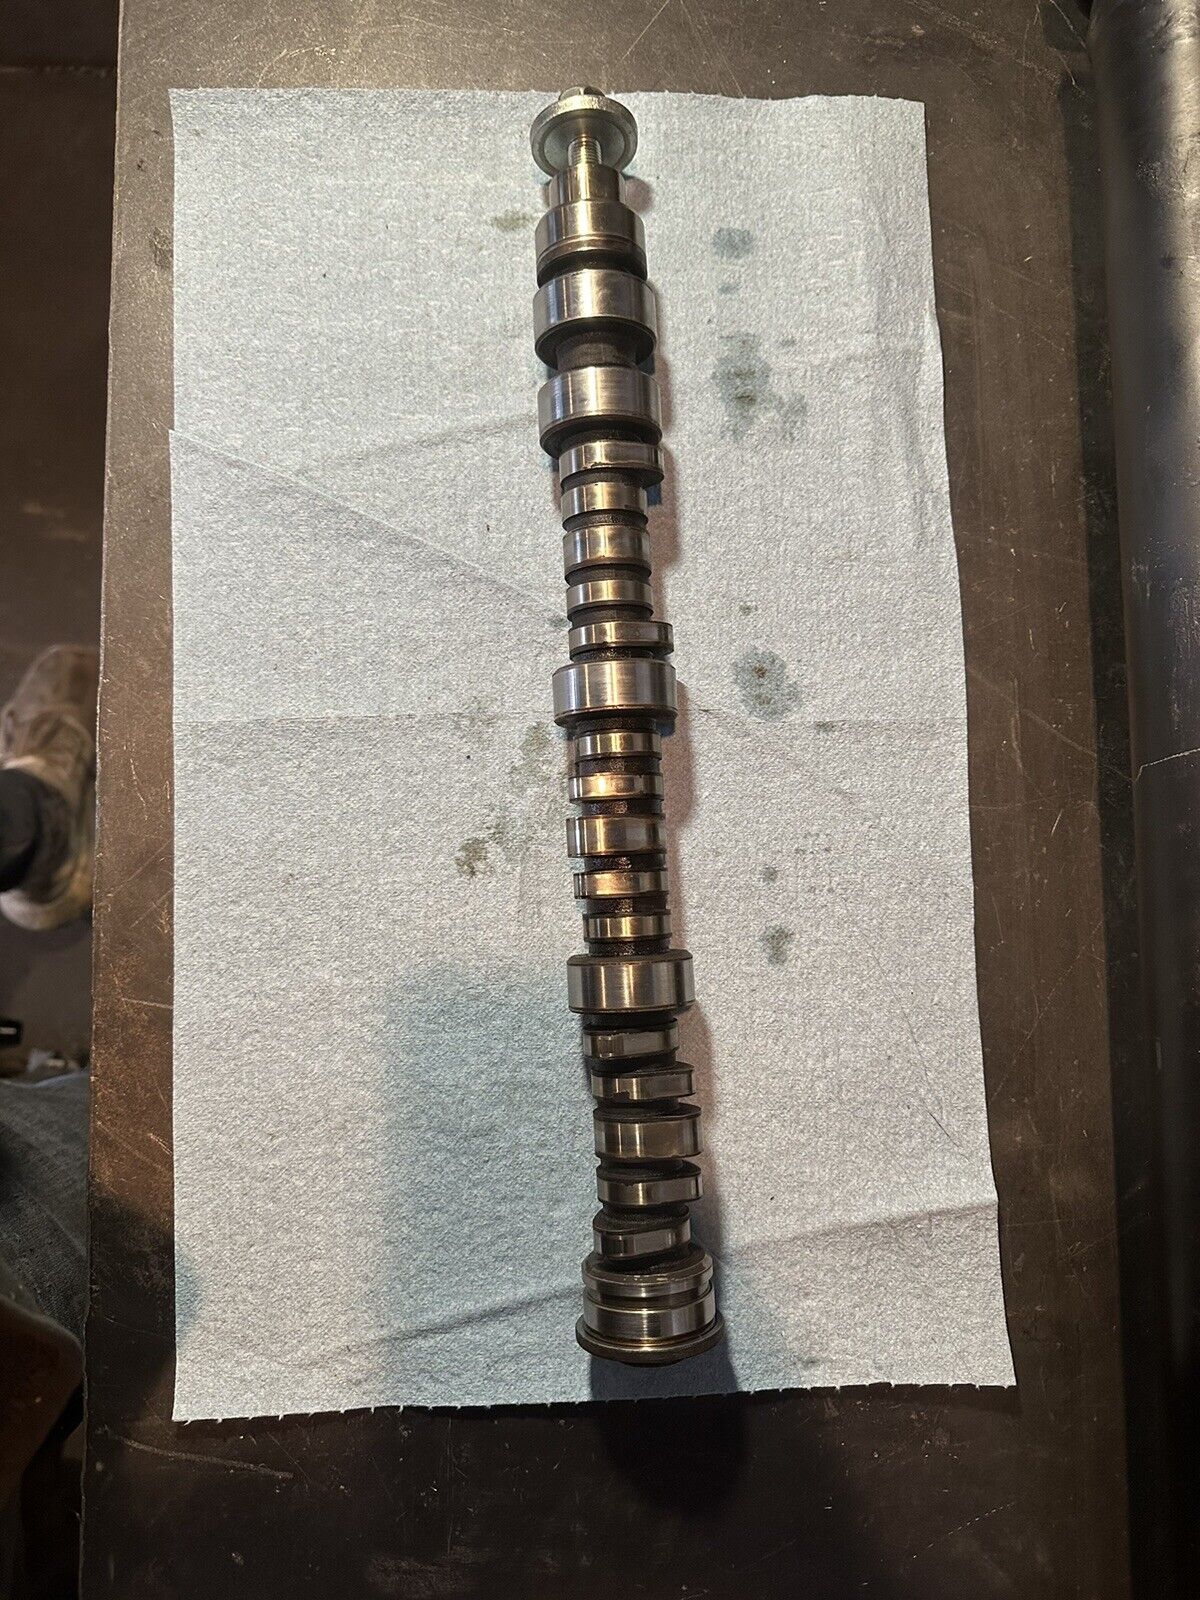 05 08 Acura Rl Intake And Exhaust Camshaft 